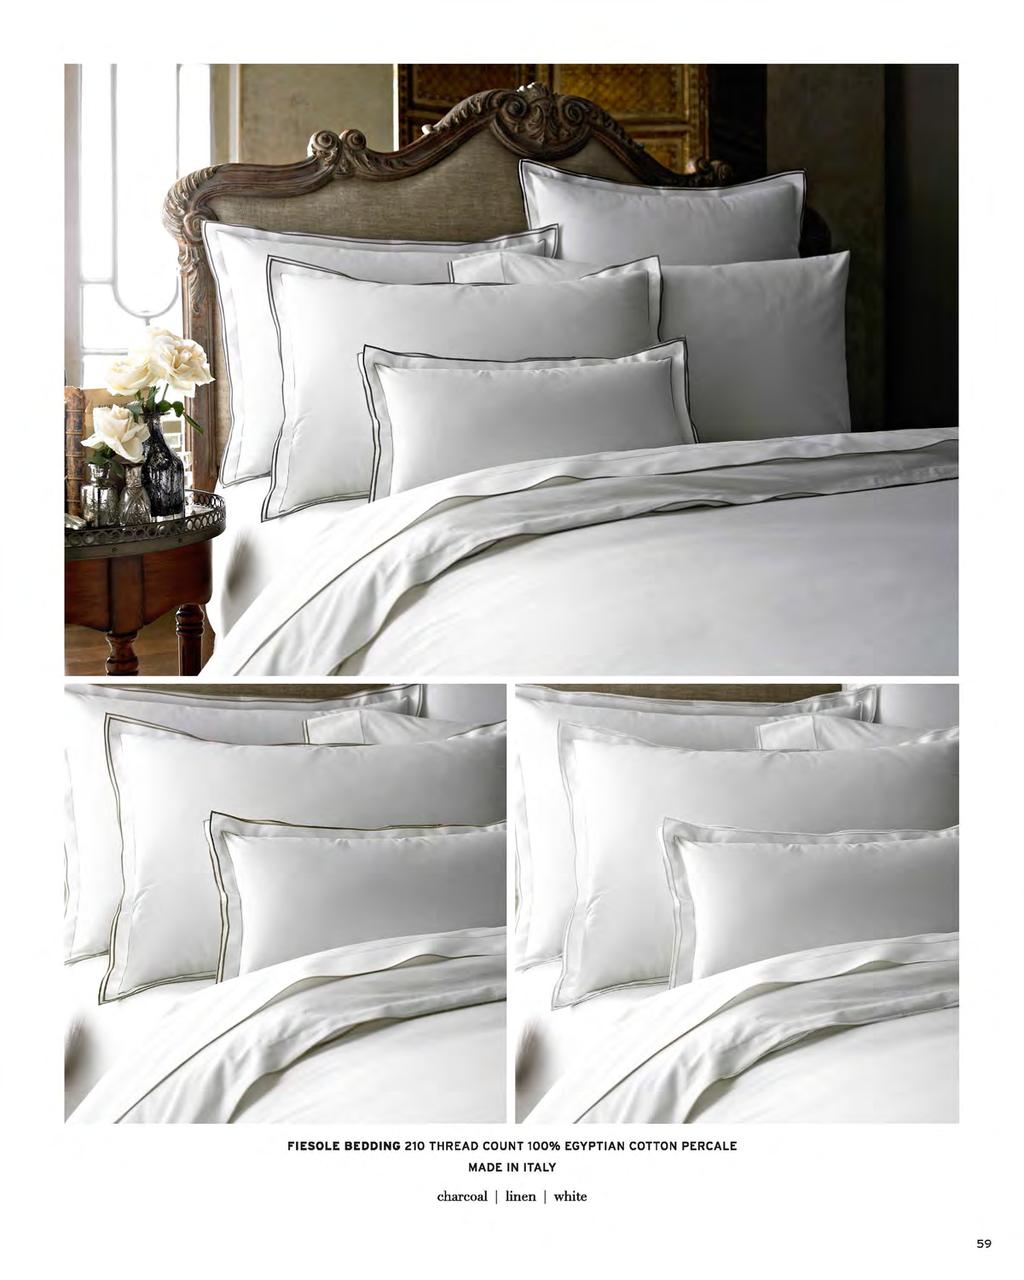 FIESOLE BEDDING 210 THREAD COUNT 100% EGYPTIAN